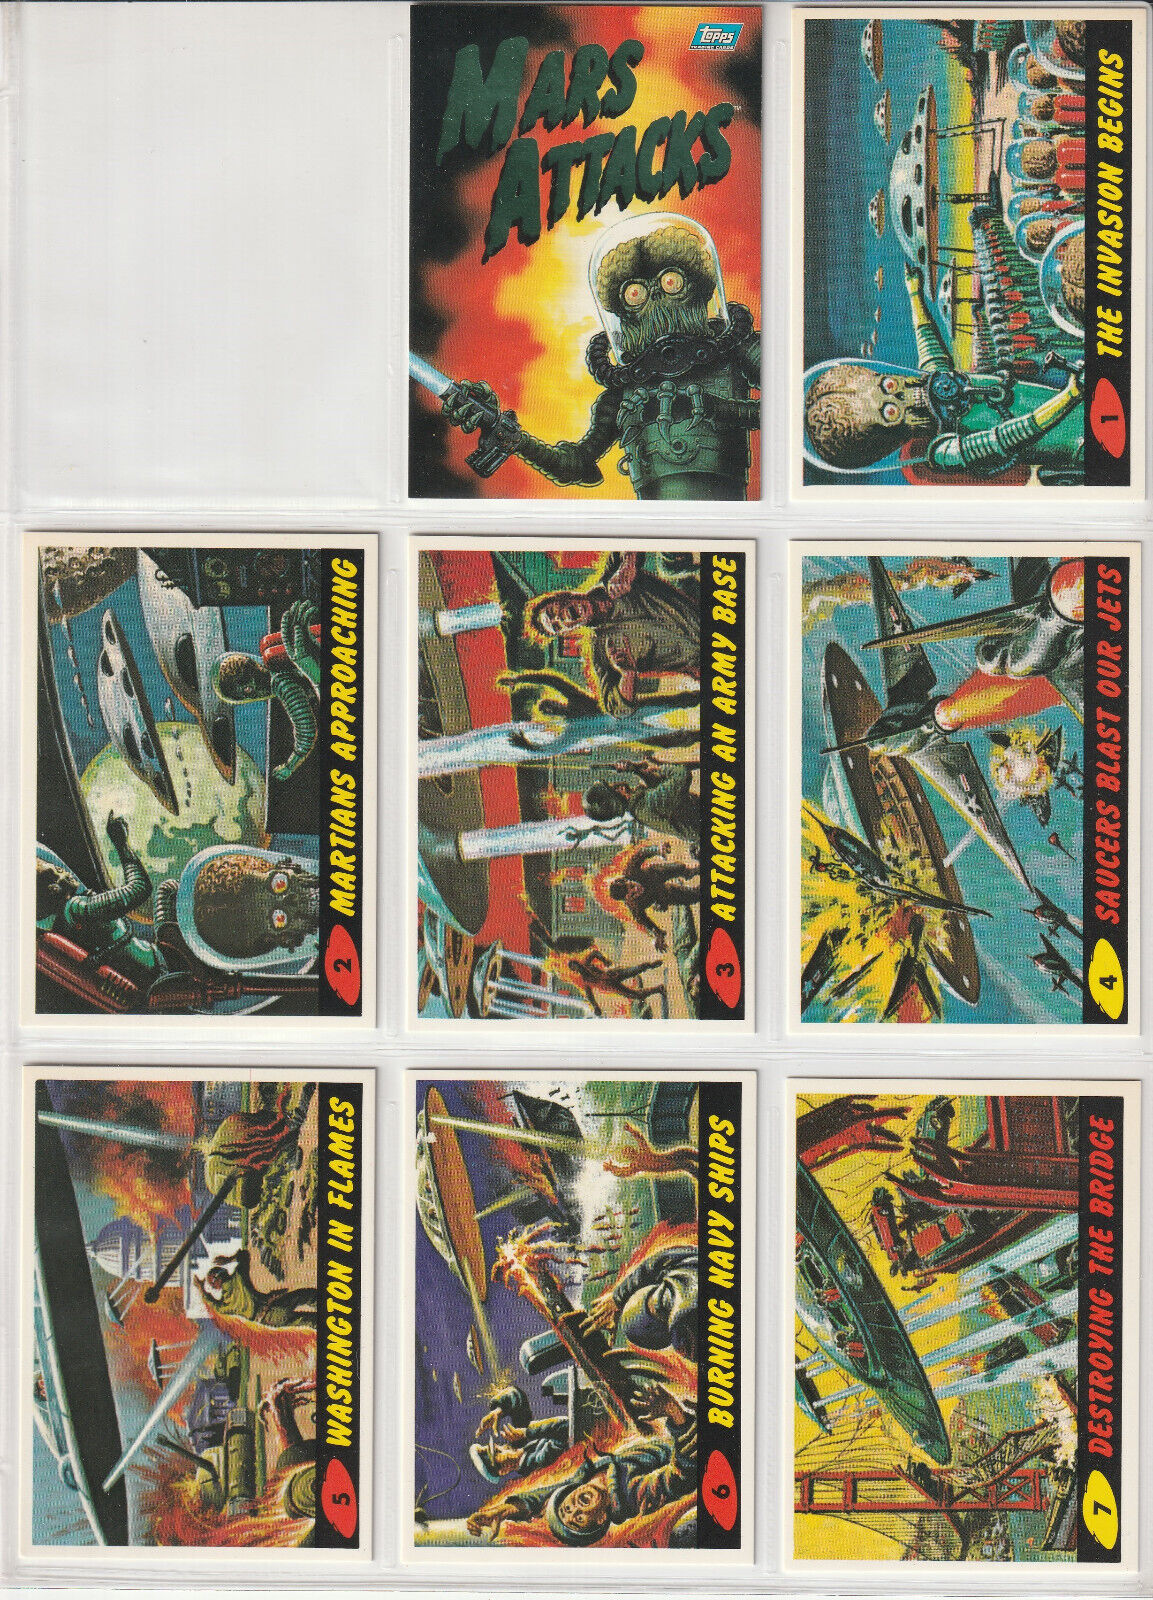 Topps Mars Attacks Archives 1994 Pick your Cards $1.00 - $2.00 Each